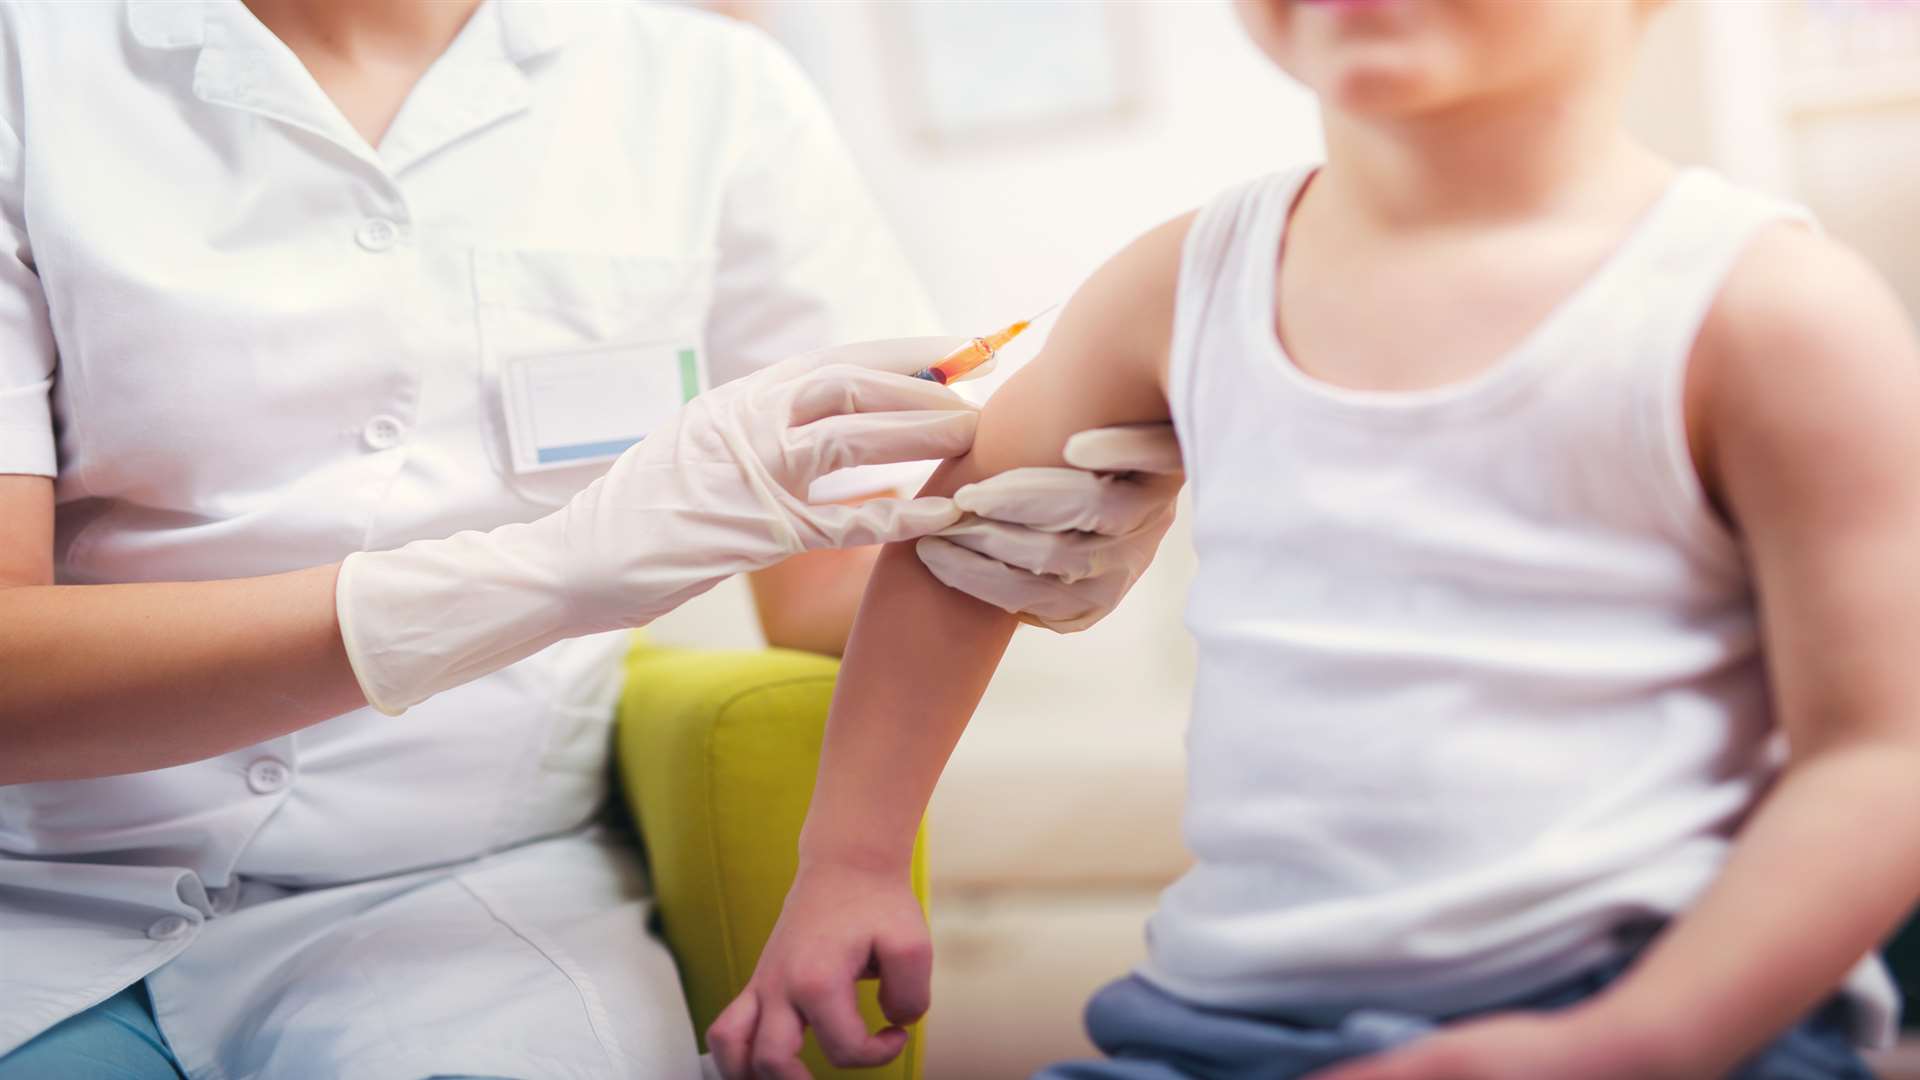 MMR immunisation protects against three separate illnesses – measles, mumps and rubella (German measles) – in a single injection